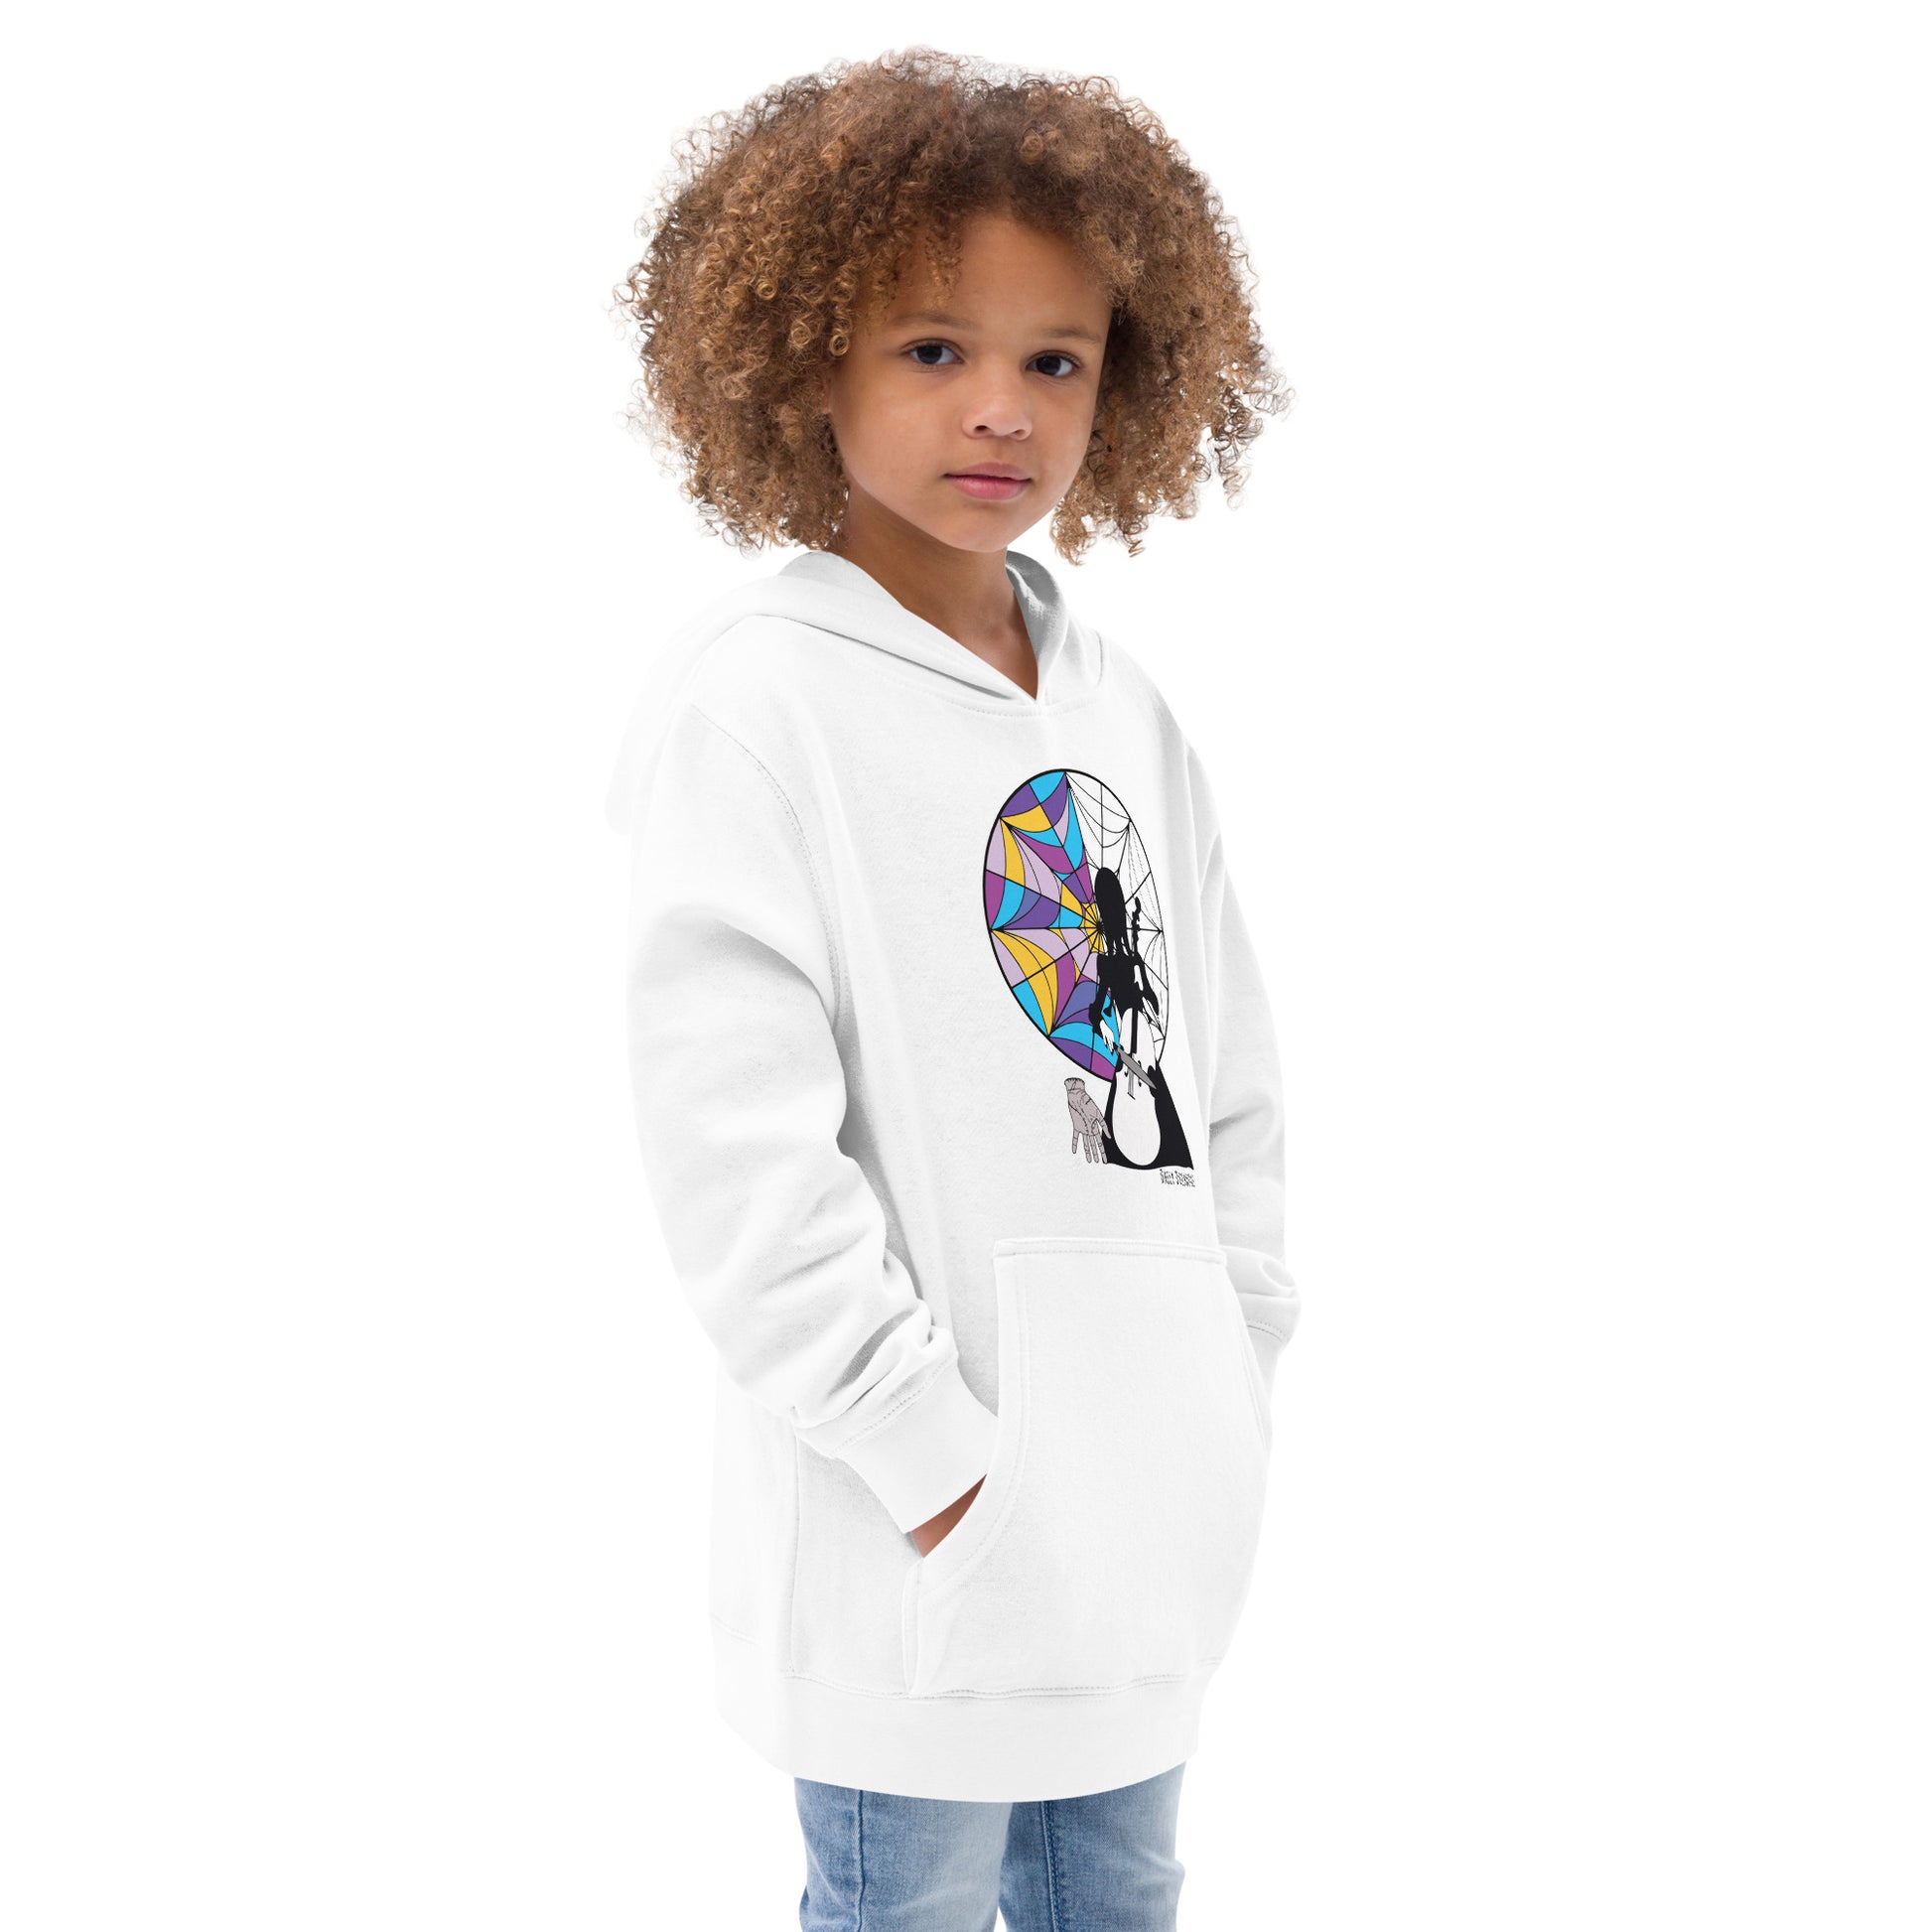 white "Wednesday Addams Cello" Kids fleece hoodie from Daily Dreadful